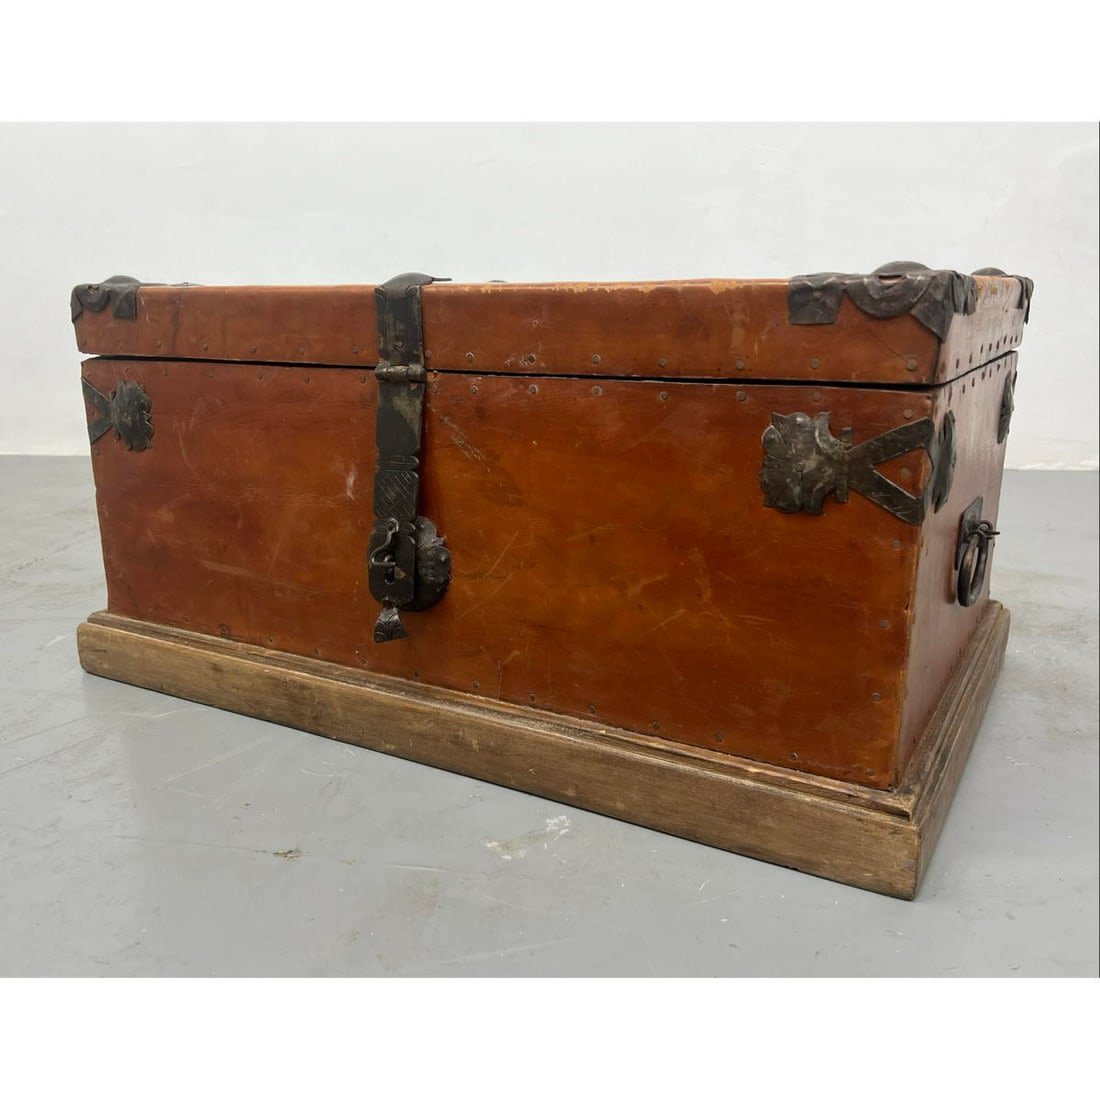 Leather Clad Pine Chest with Hammered 362a91